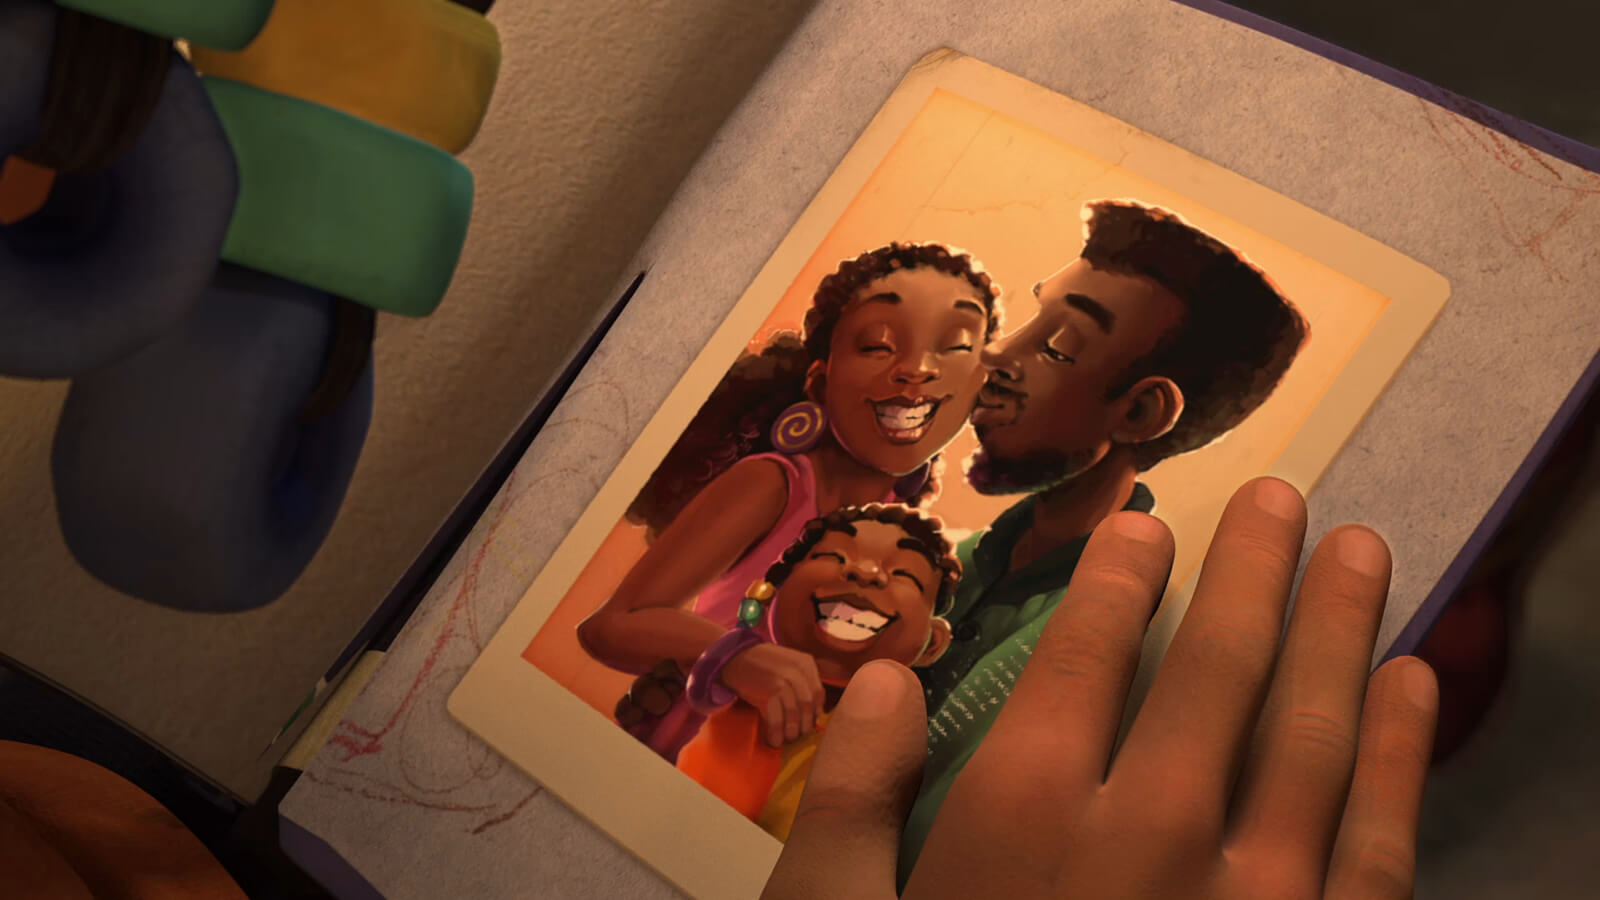 A hand is on a scrapbook containing a photo of a family, with a man kissing a smiling woman and a smiling girl below them